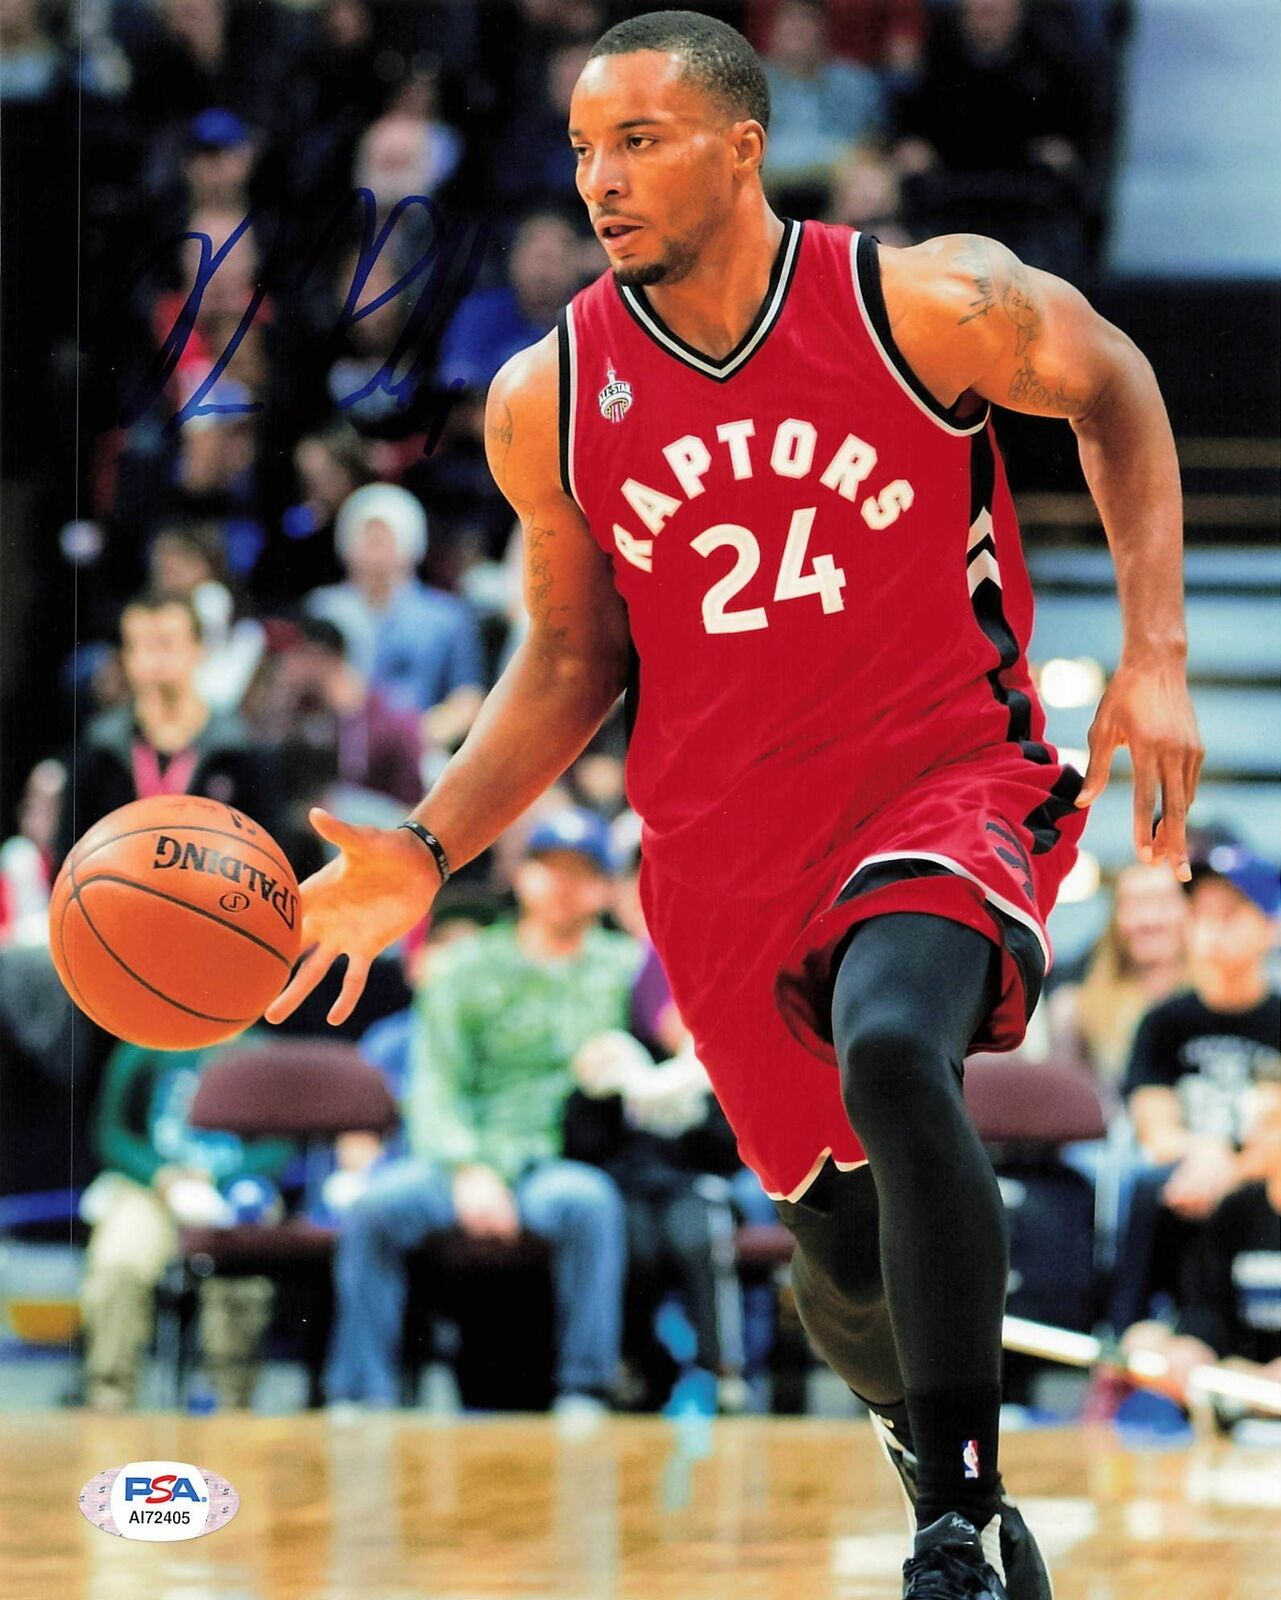 NORMAN POWELL signed 8x10 Photo Poster painting PSA/DNA Toronto Raptors Autographed